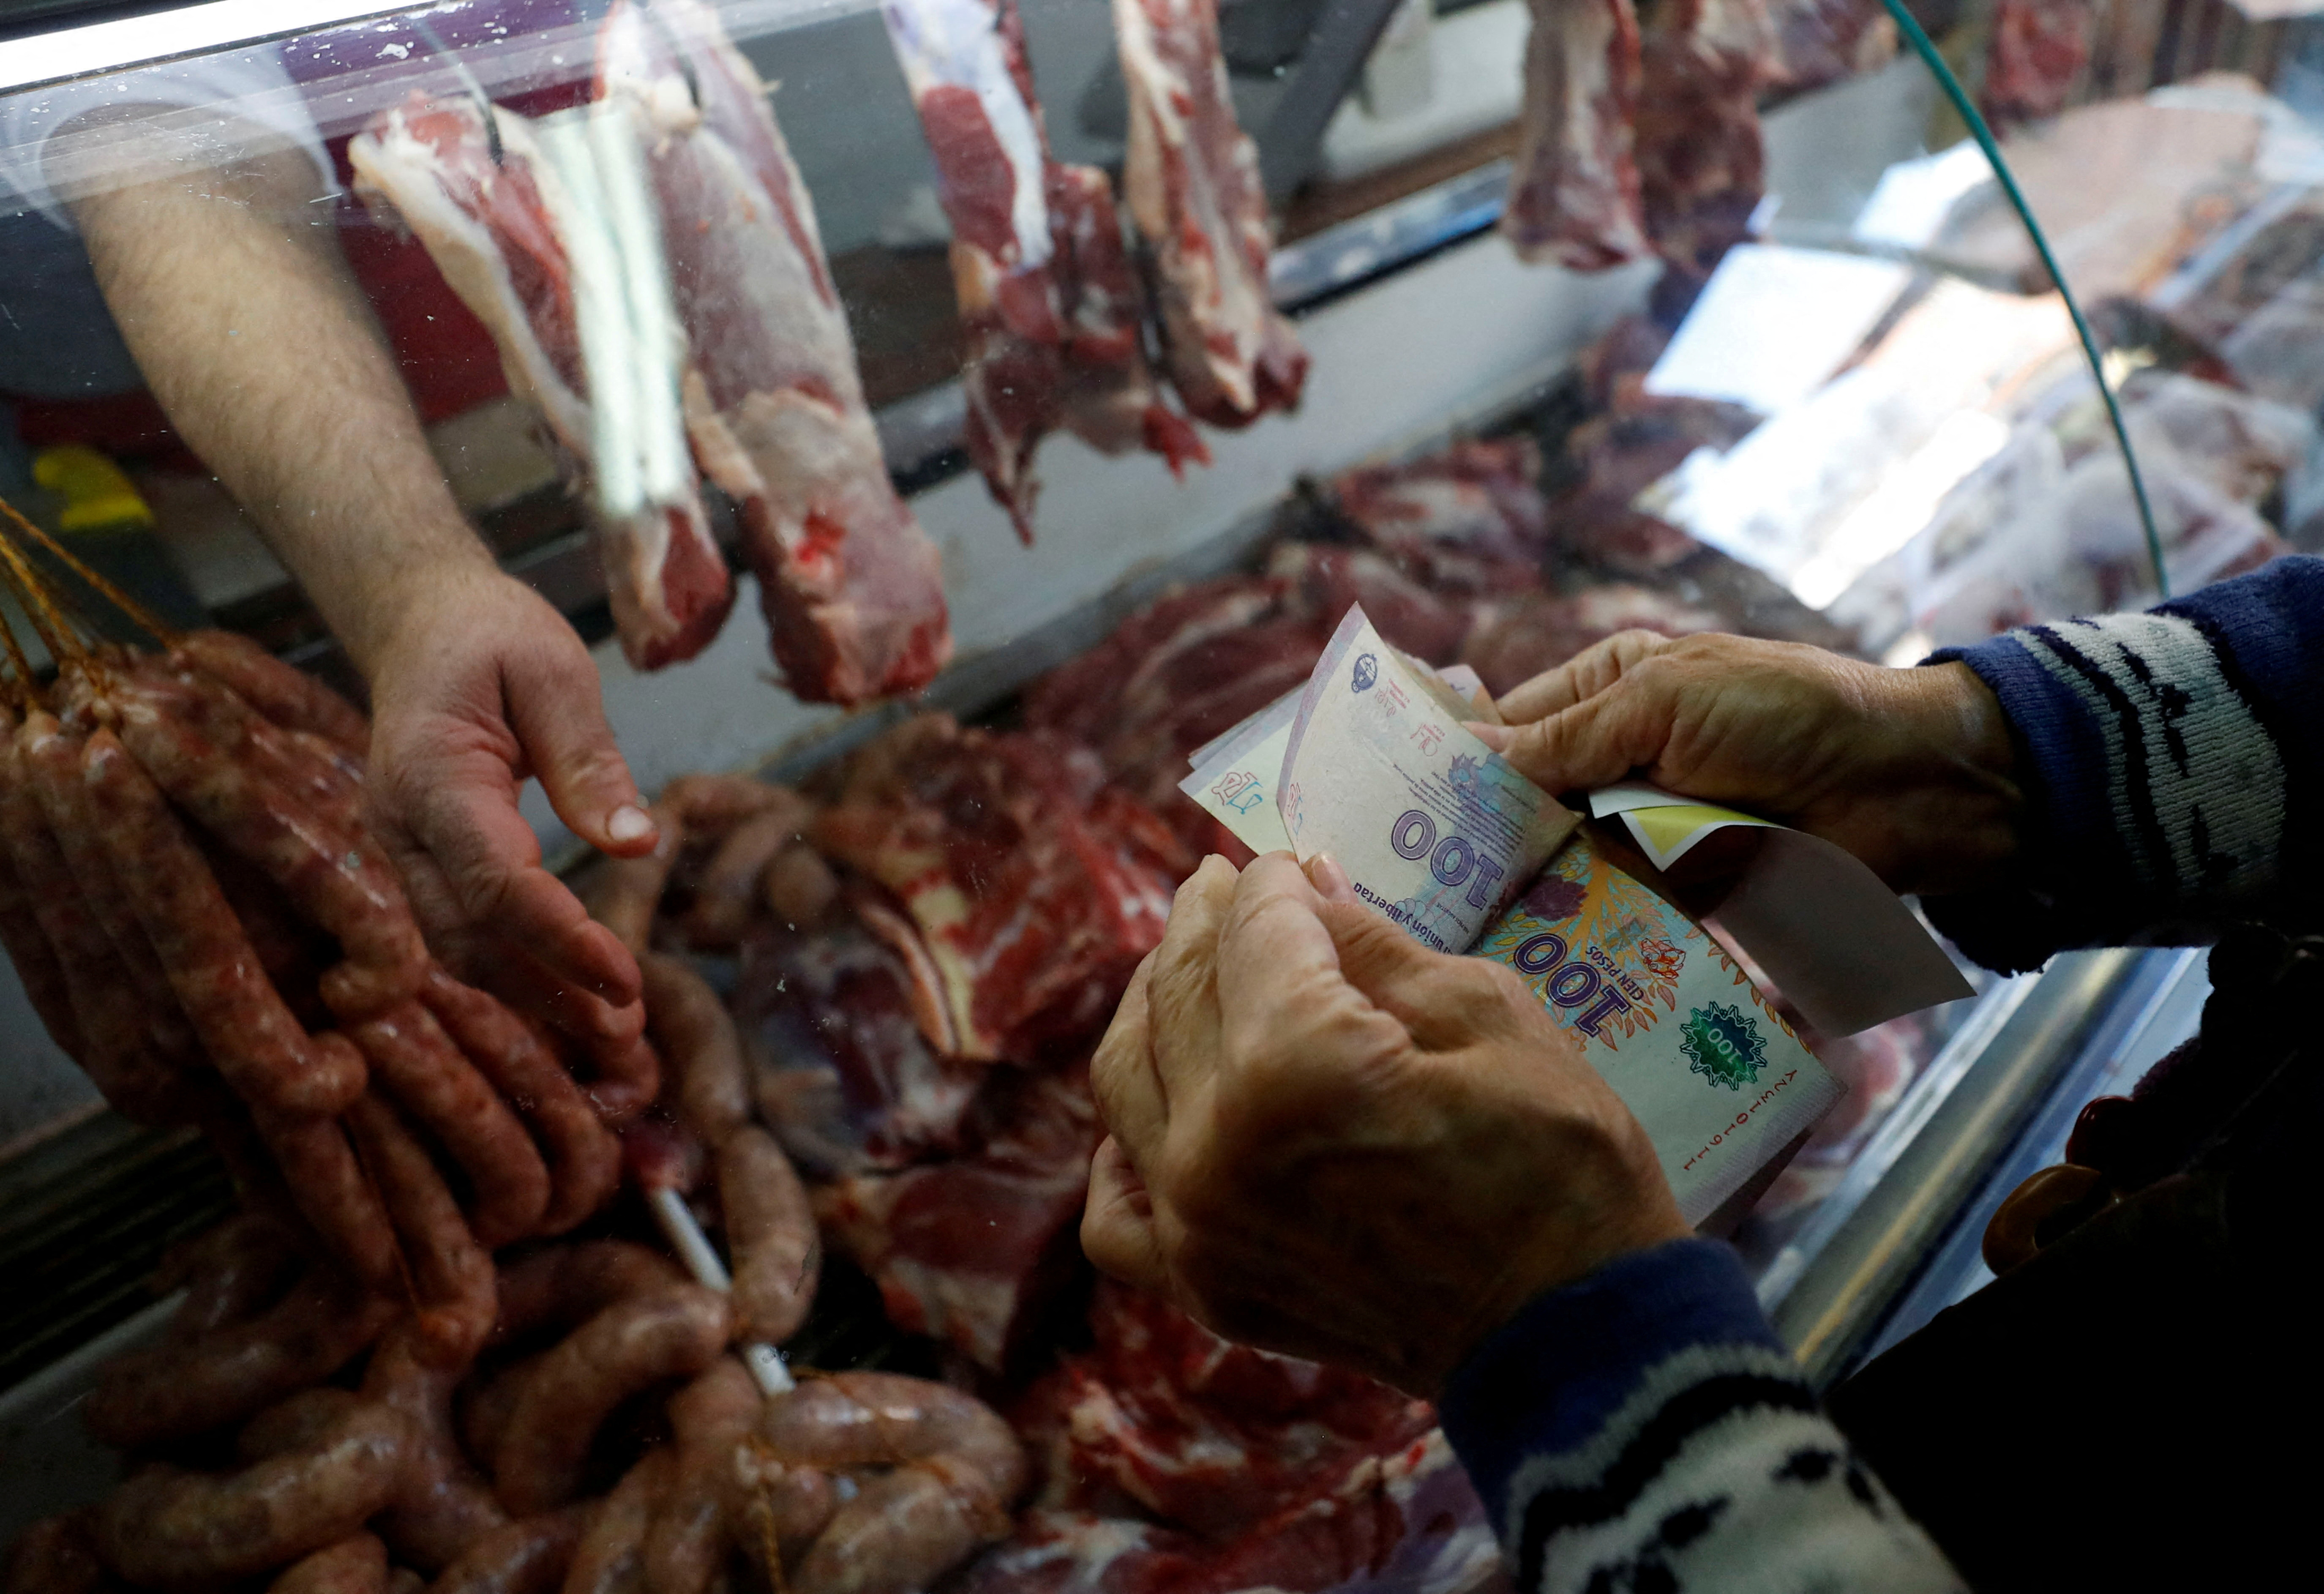 FILE PHOTO: A customer counts money  before paying at a butcher shop, as inflation in Argentina hits its highest level in years, causing food prices to spiral, in Buenos Aires, Argentina September 13, 2022. REUTERS/Agustin Marcarian/File Photo